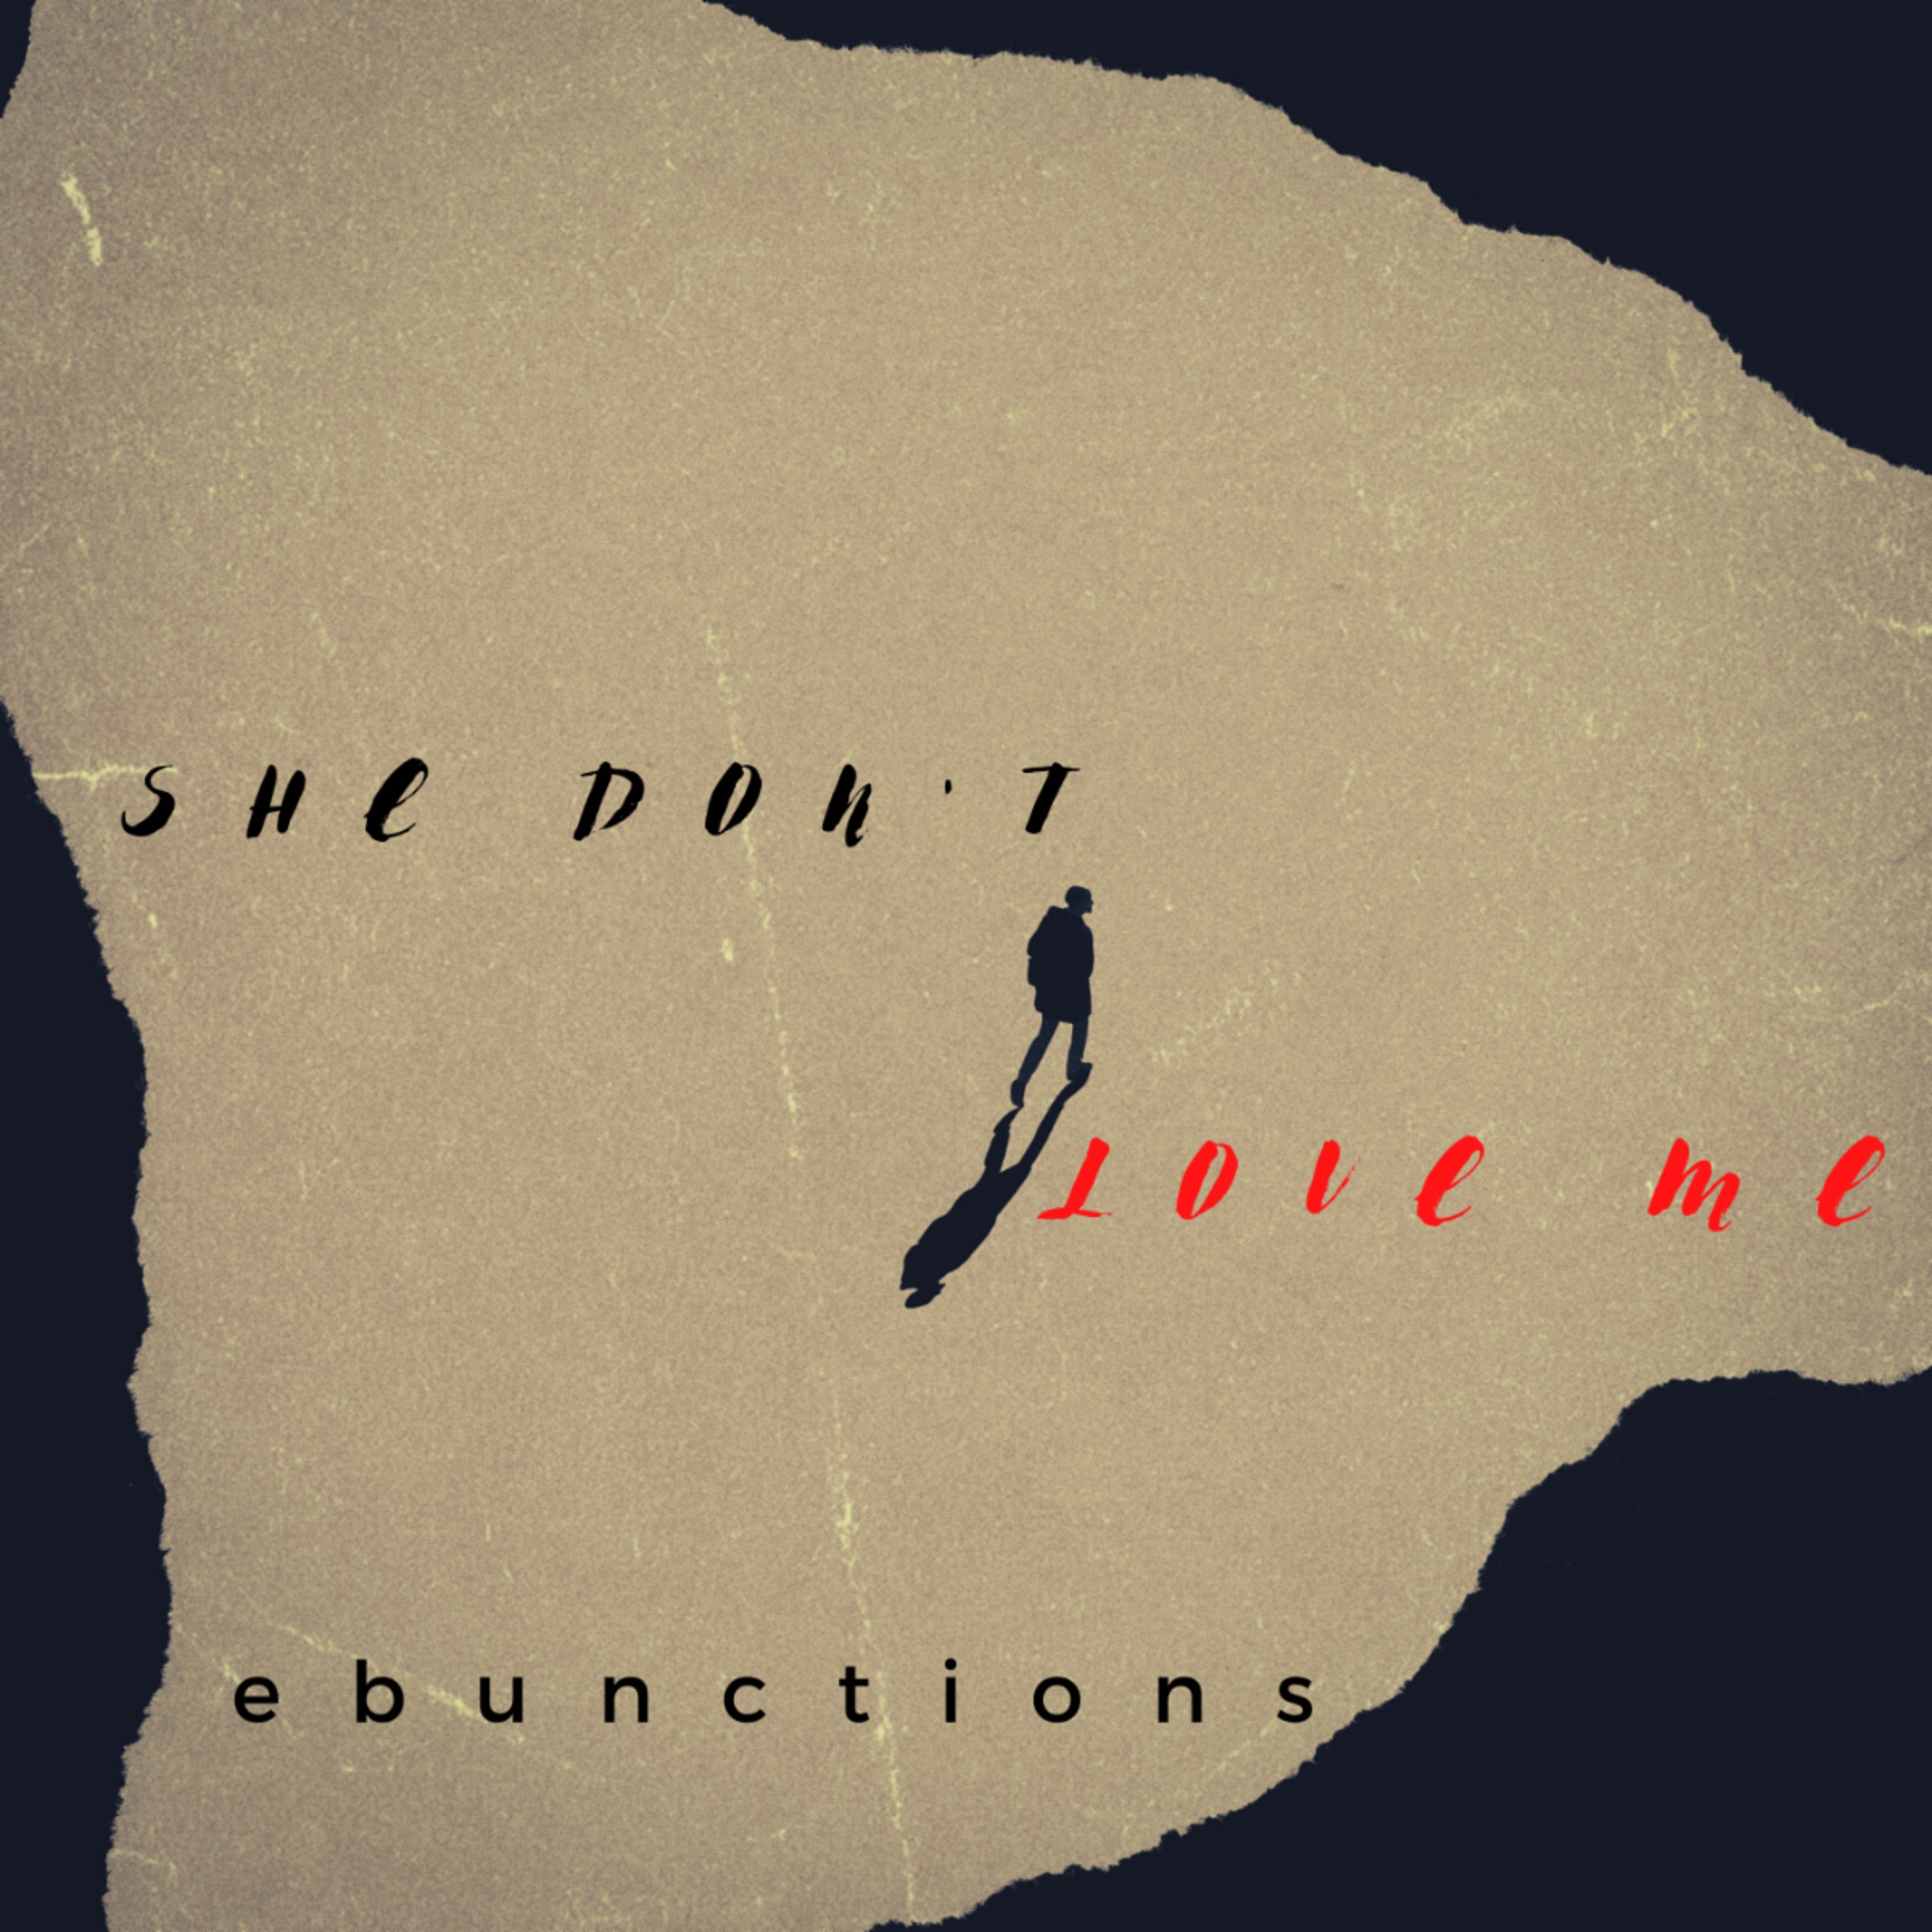 Ebunctions Release Music Video for Third Single “She Don’t Love Me” 